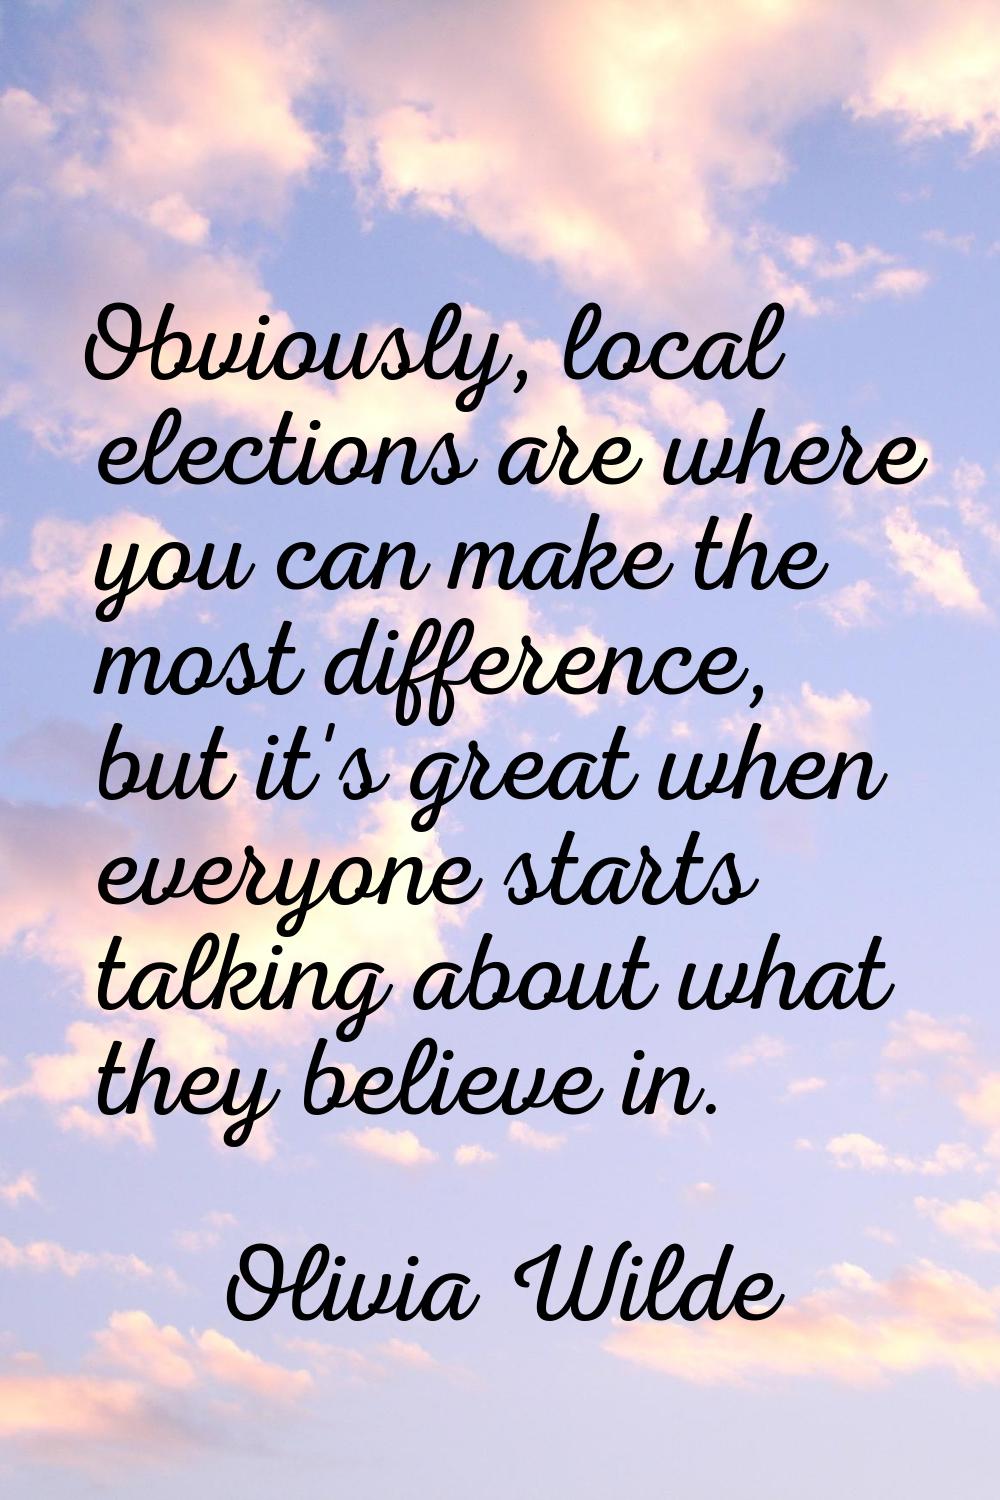 Obviously, local elections are where you can make the most difference, but it's great when everyone